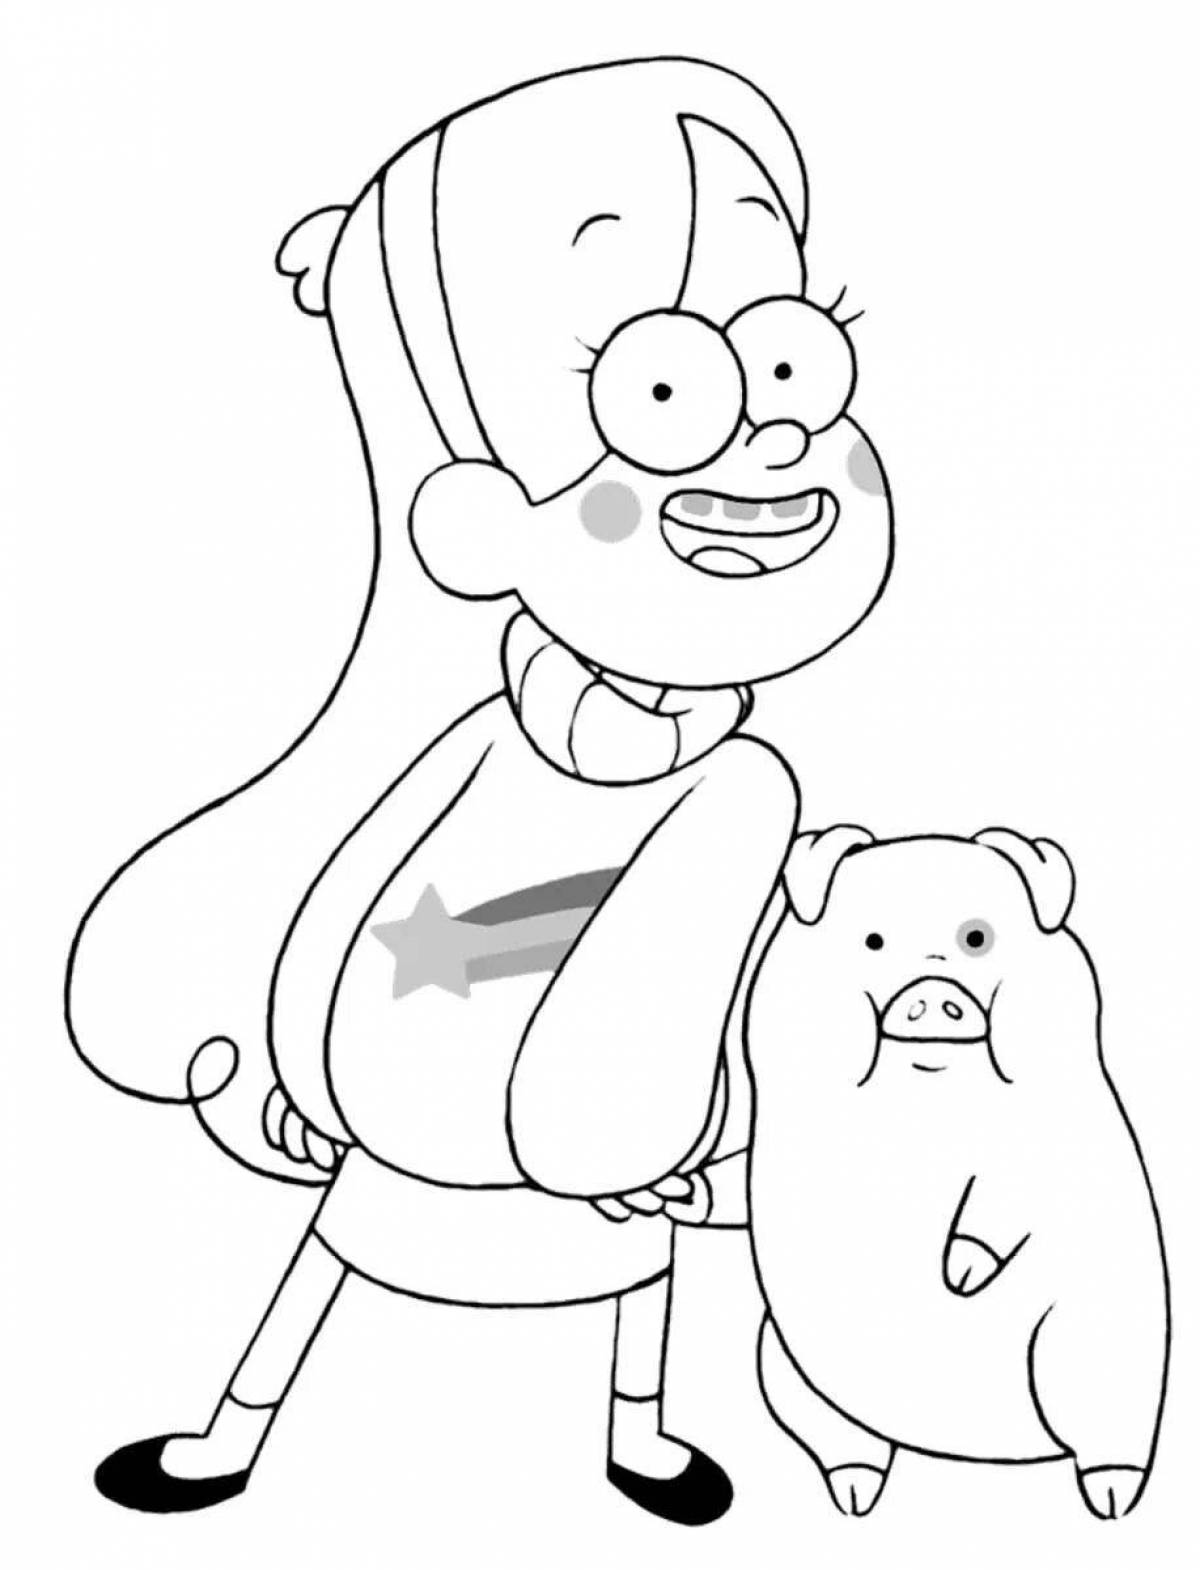 Wendy's friendly gravity falls coloring book